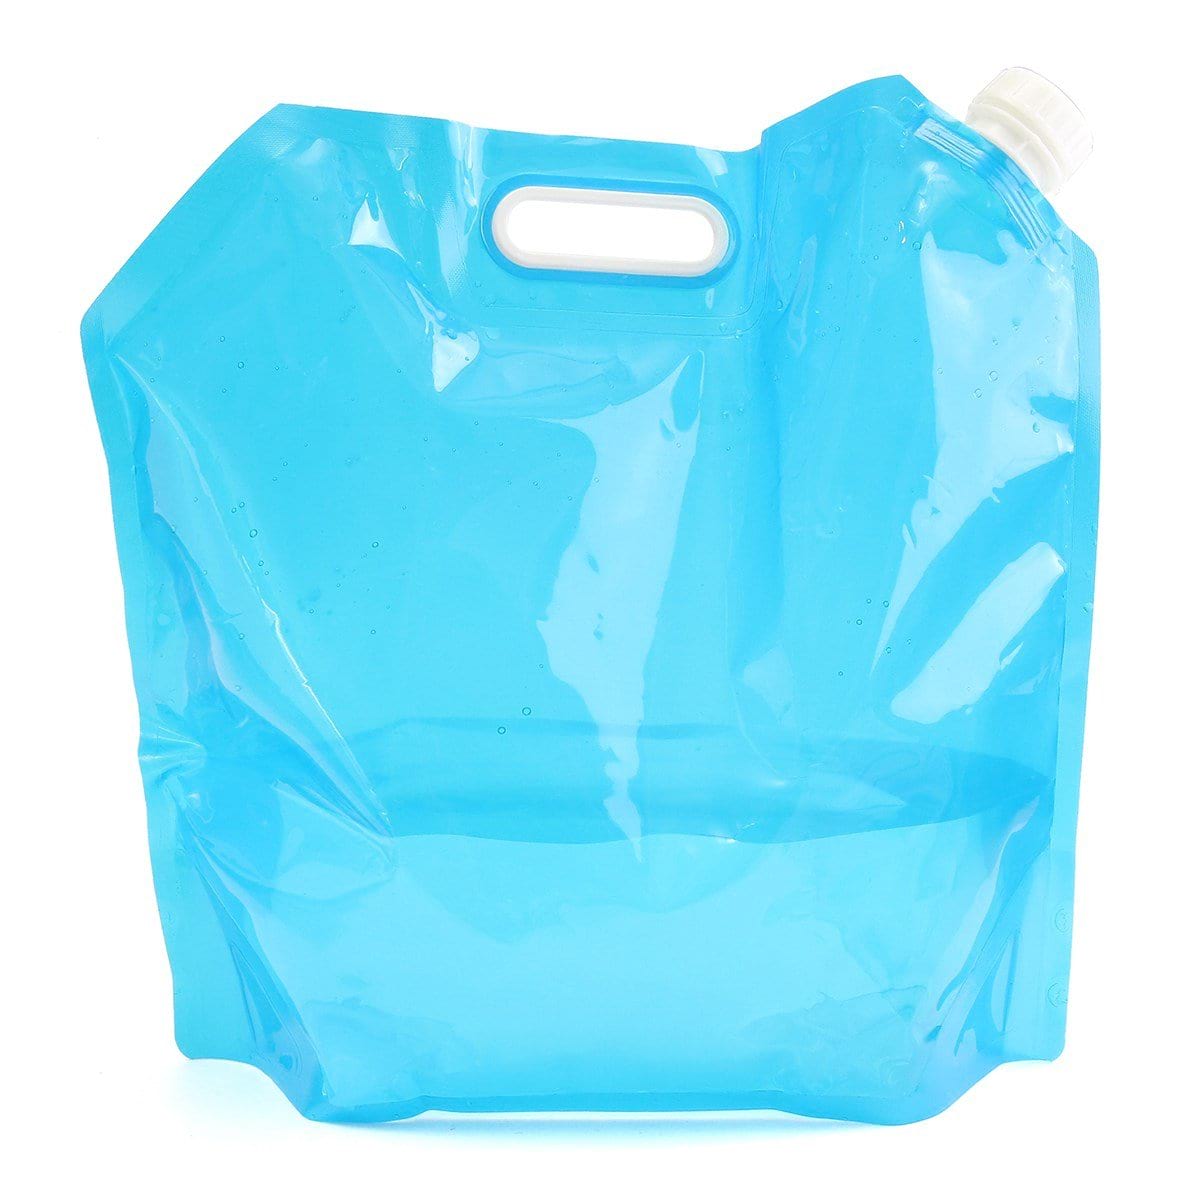 http://prepper-profi.de/cdn/shop/products/Safurance-Outdoor-10L-Collapsible-Camping-Emergency-Survival-Water-Storage-Carrier-Bag-Supply-Emergency-Kit-Safety_439f1eb3-a24b-4a31-a03c-f4c5c3a31f68_1200x1200.jpg?v=1569123446